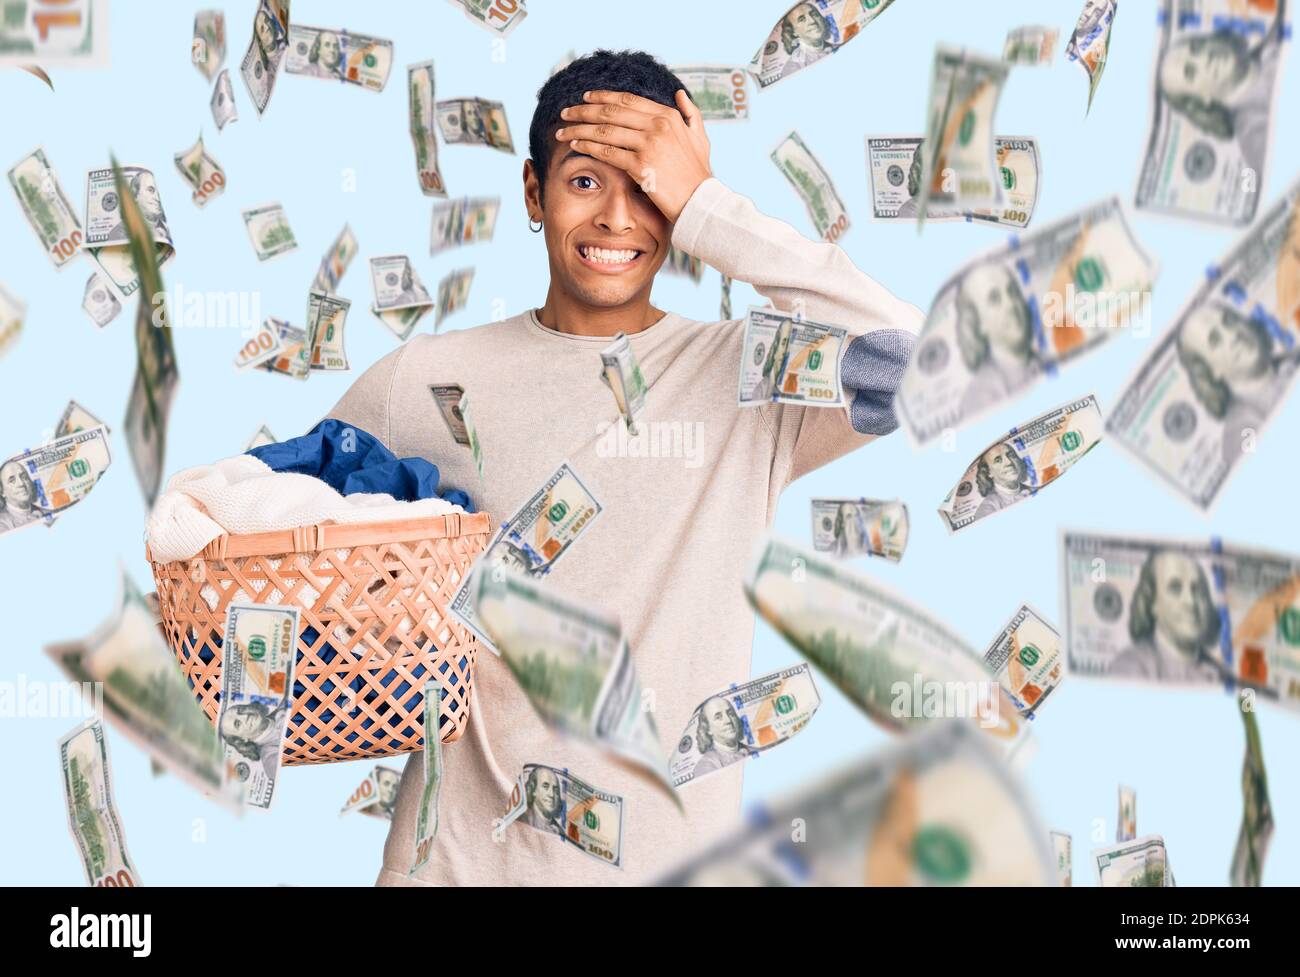 Young african amercian man holding laundry basket stressed and frustrated with hand on head, surprised and angry face Stock Photo